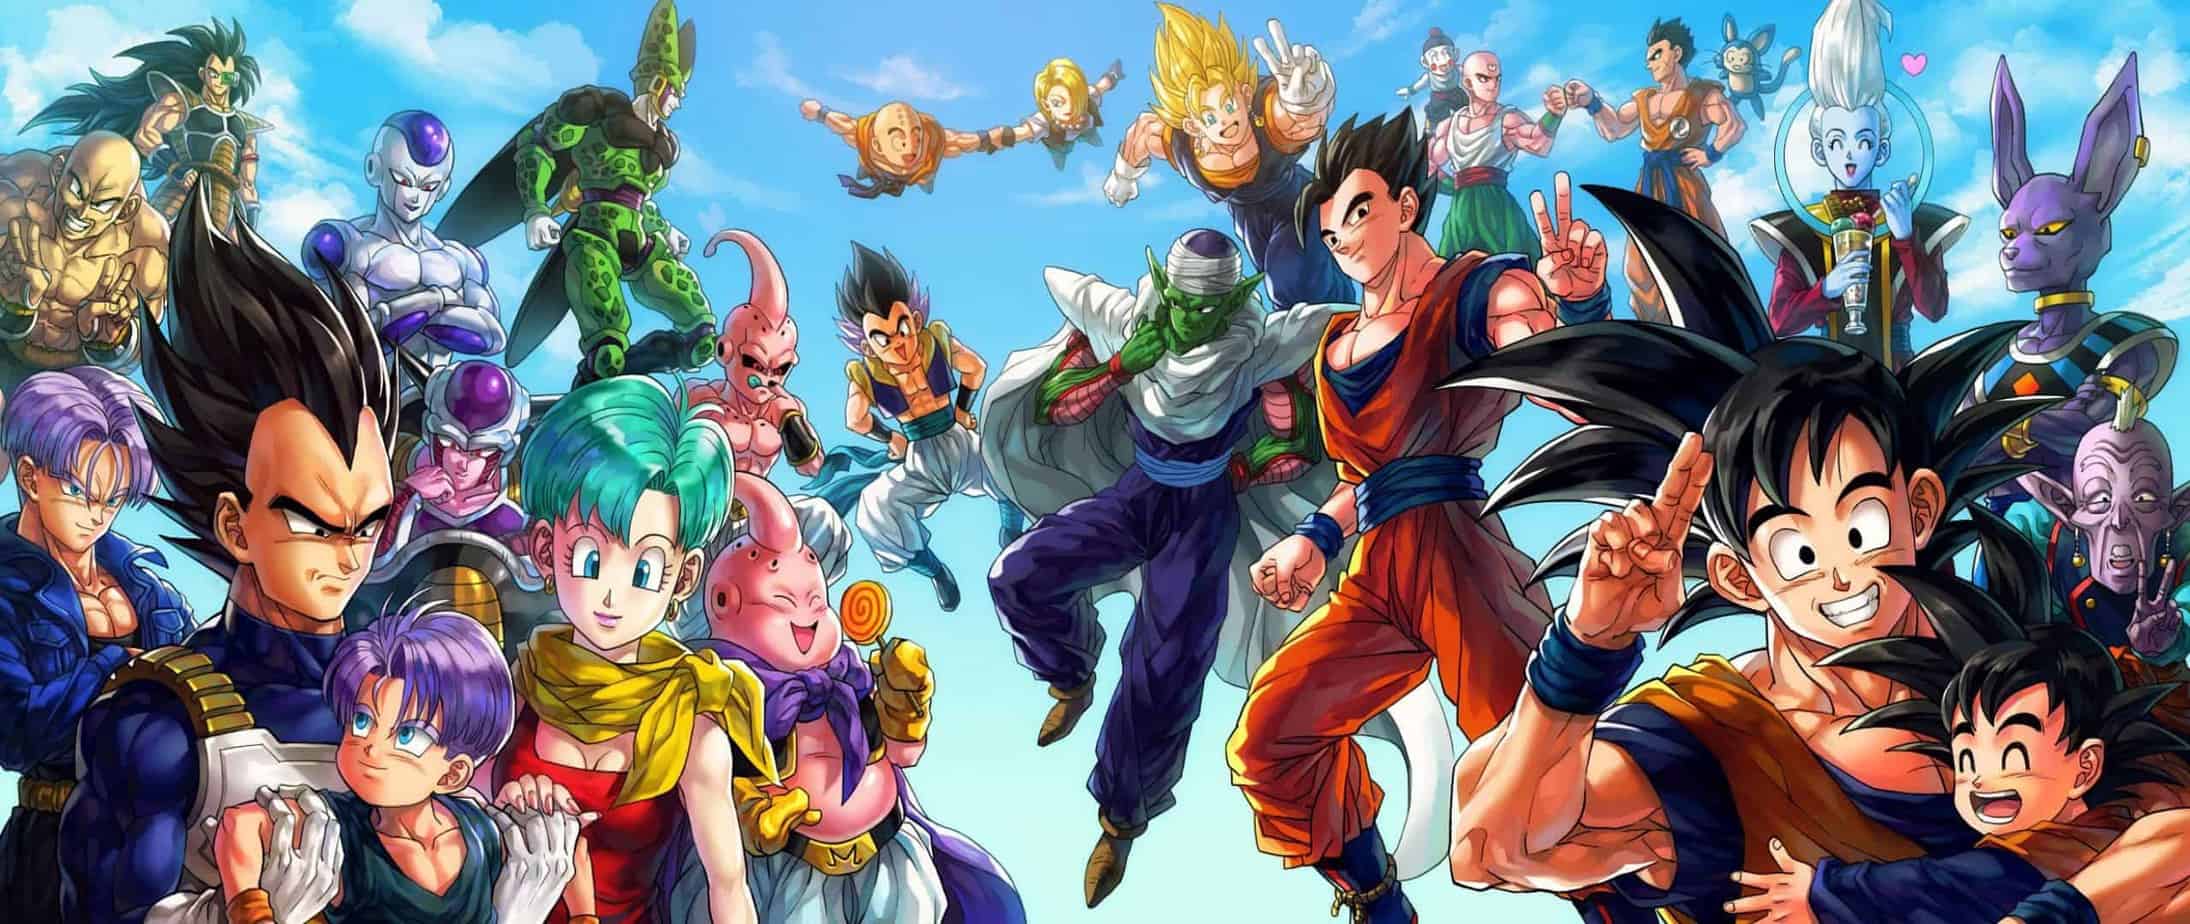 Dragon Ball Watch Order guide: How to watch